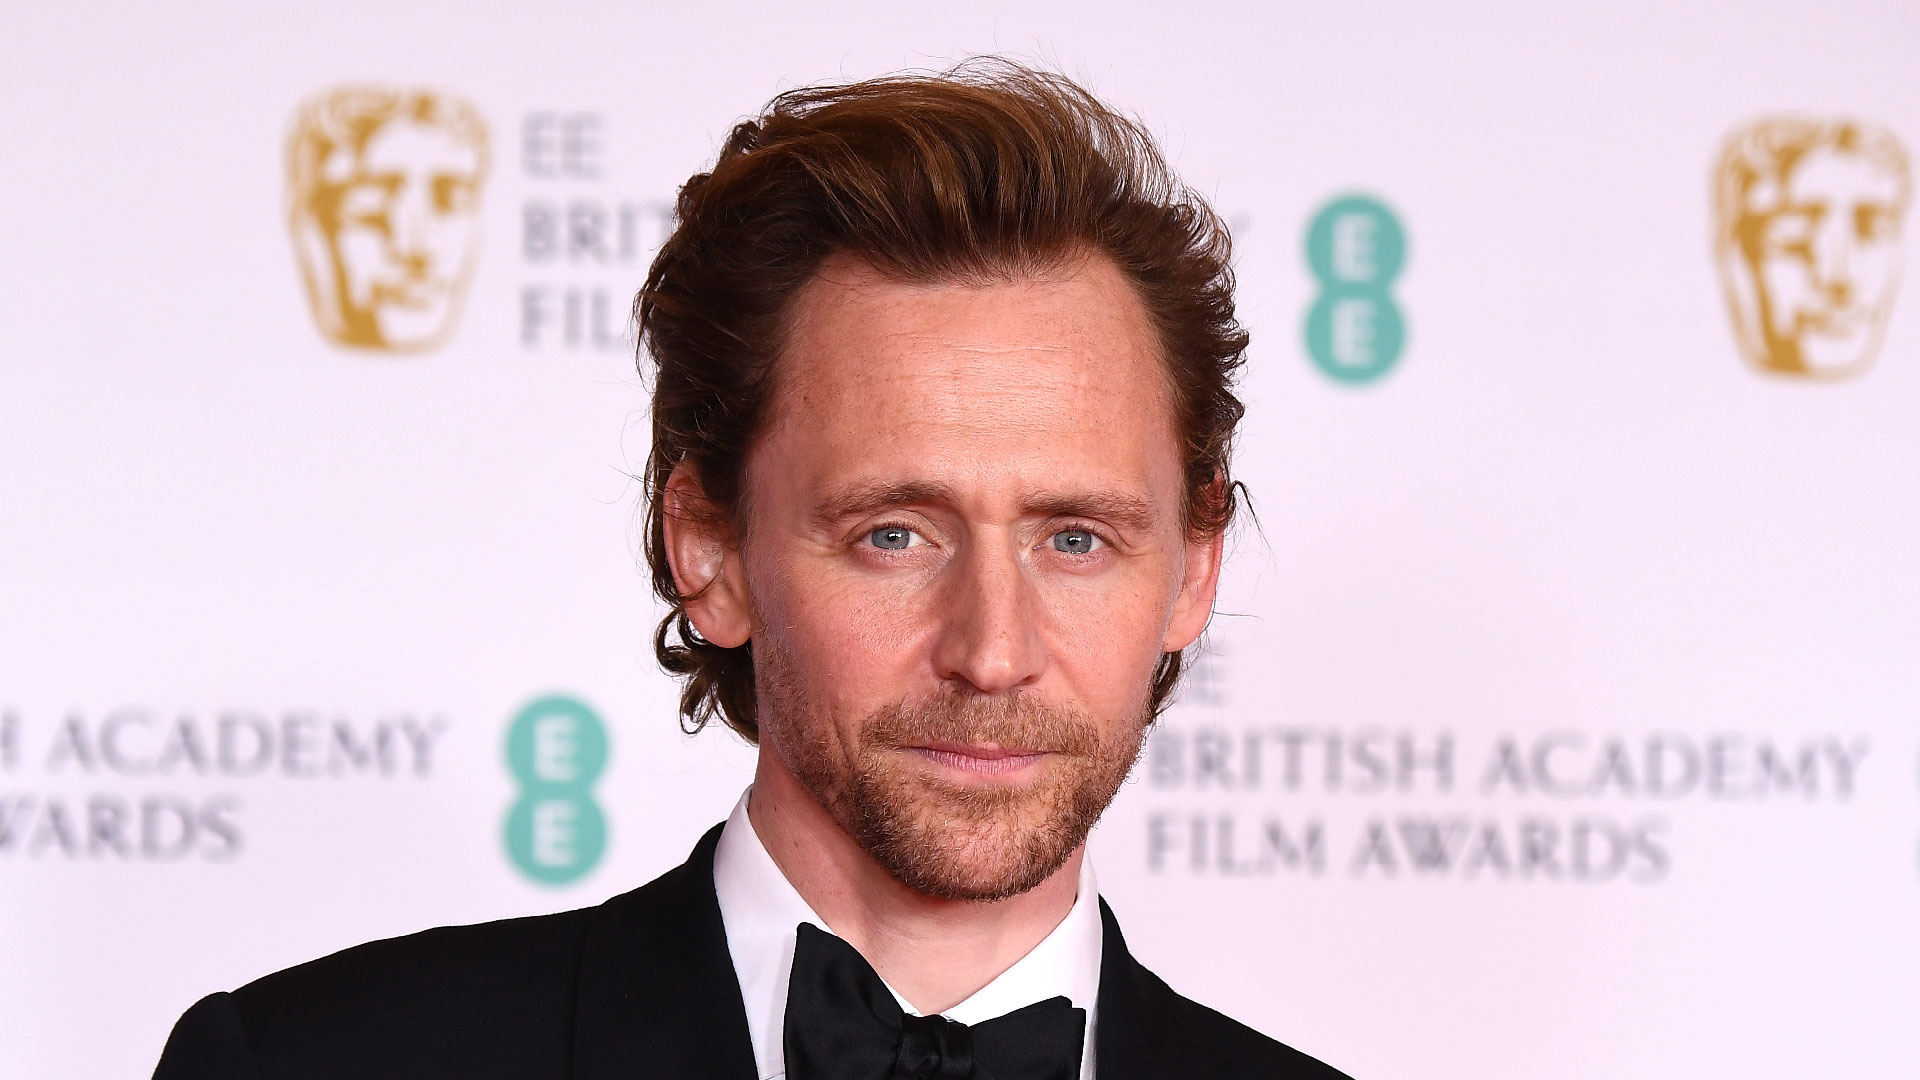 How Tall Is Tom Hiddleston? The 'Loki' Actor's Height, Confirmed